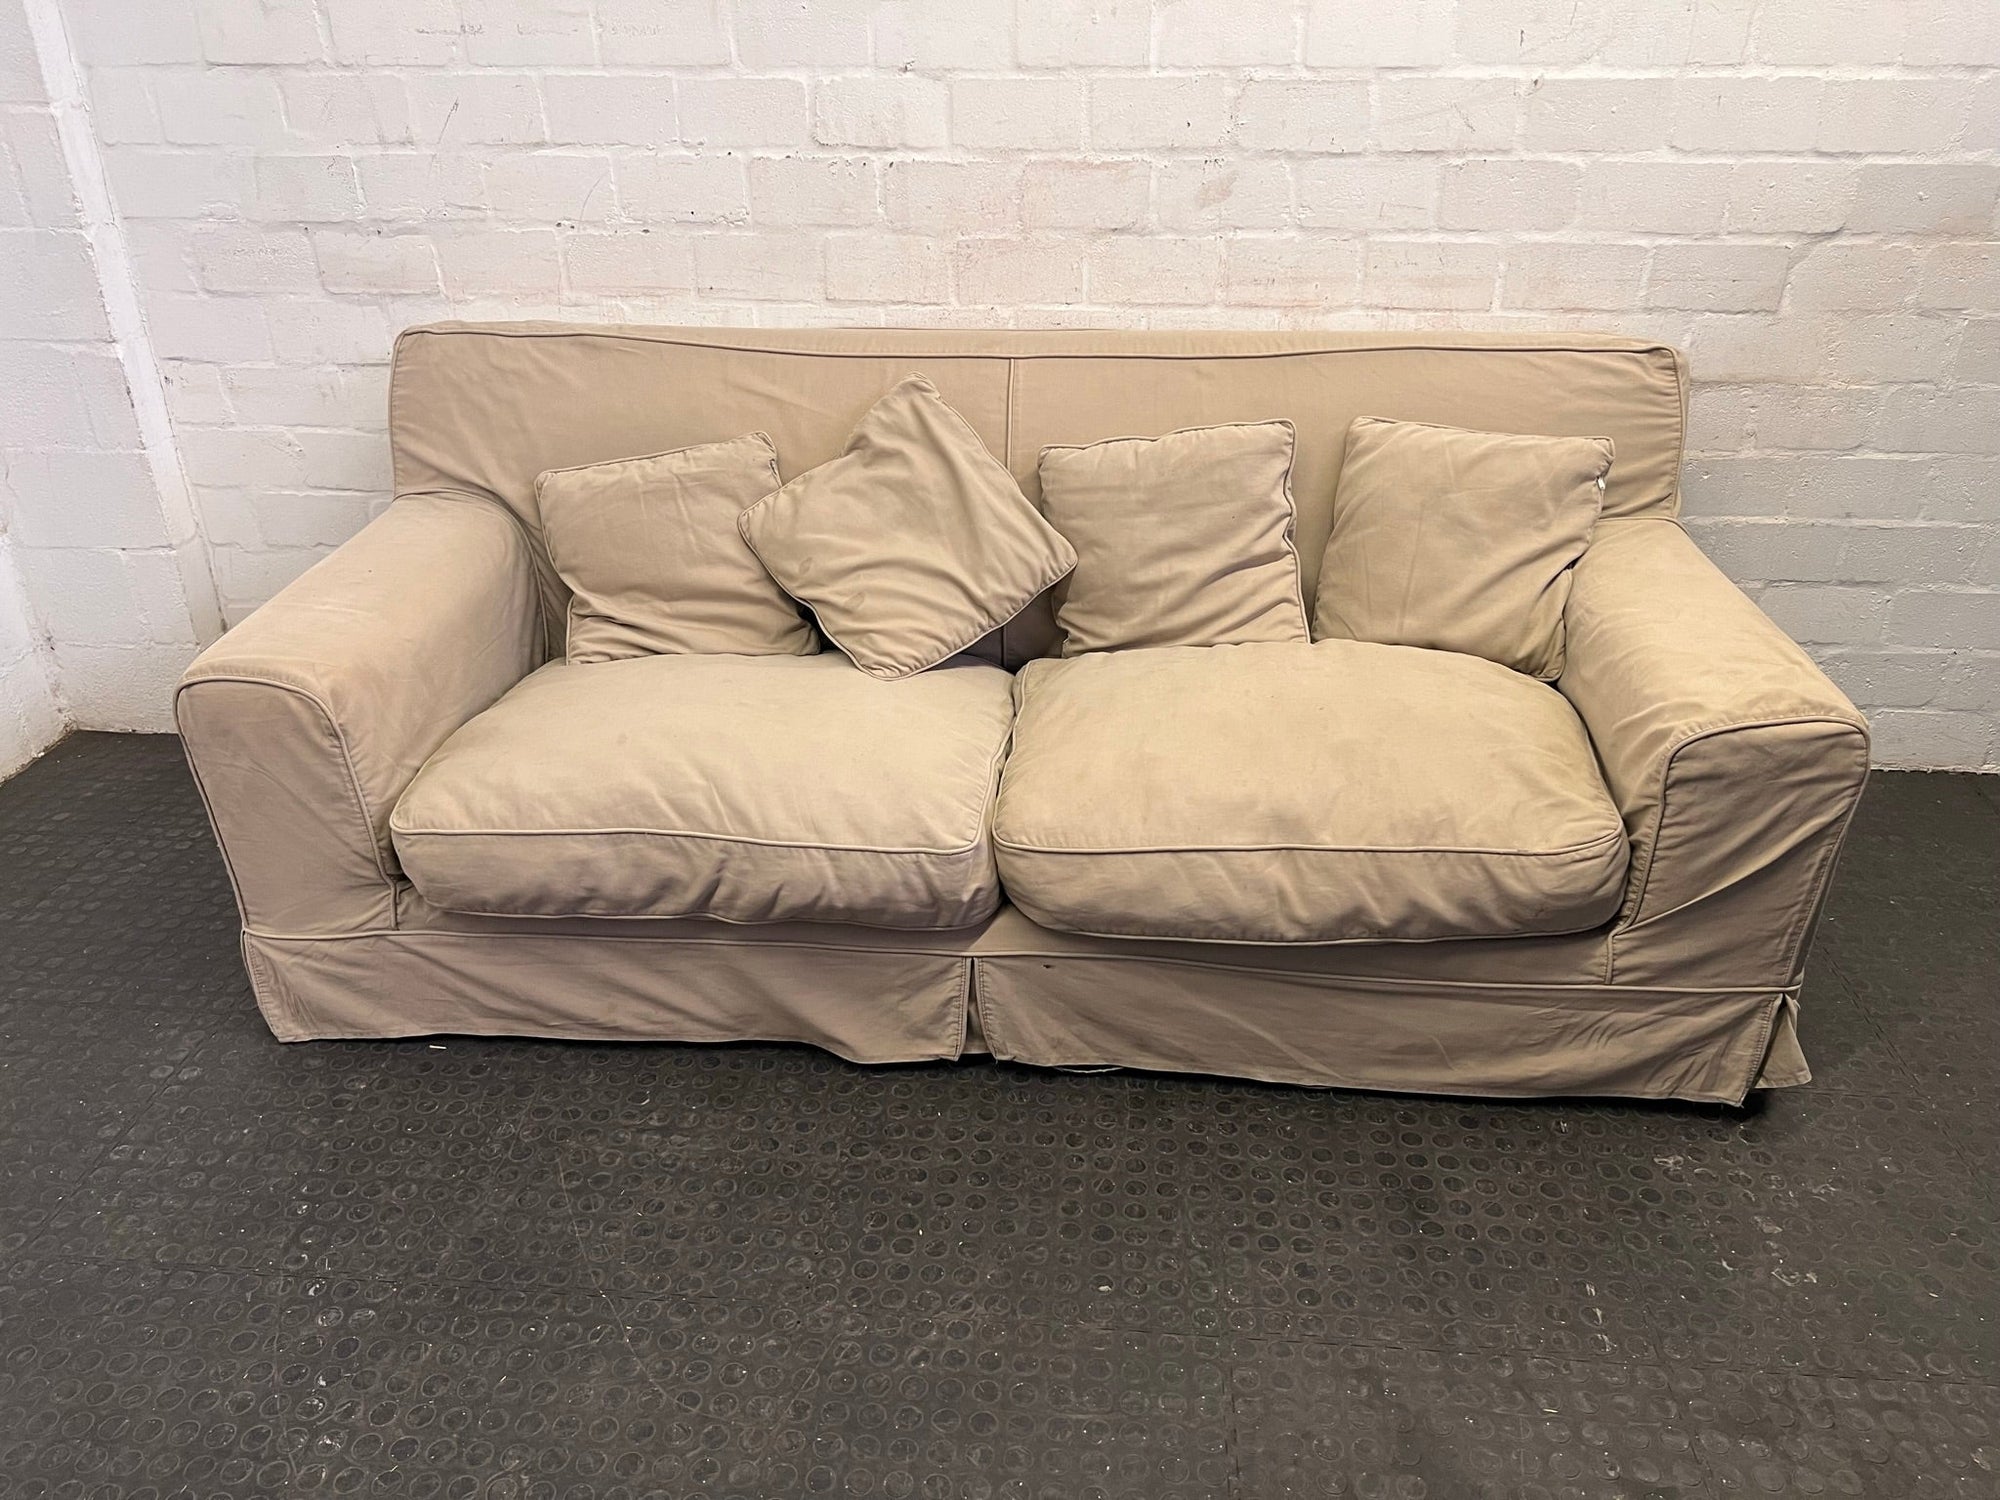 Tan Fabric Two Seater Couch with Slip Cover - REDUCED